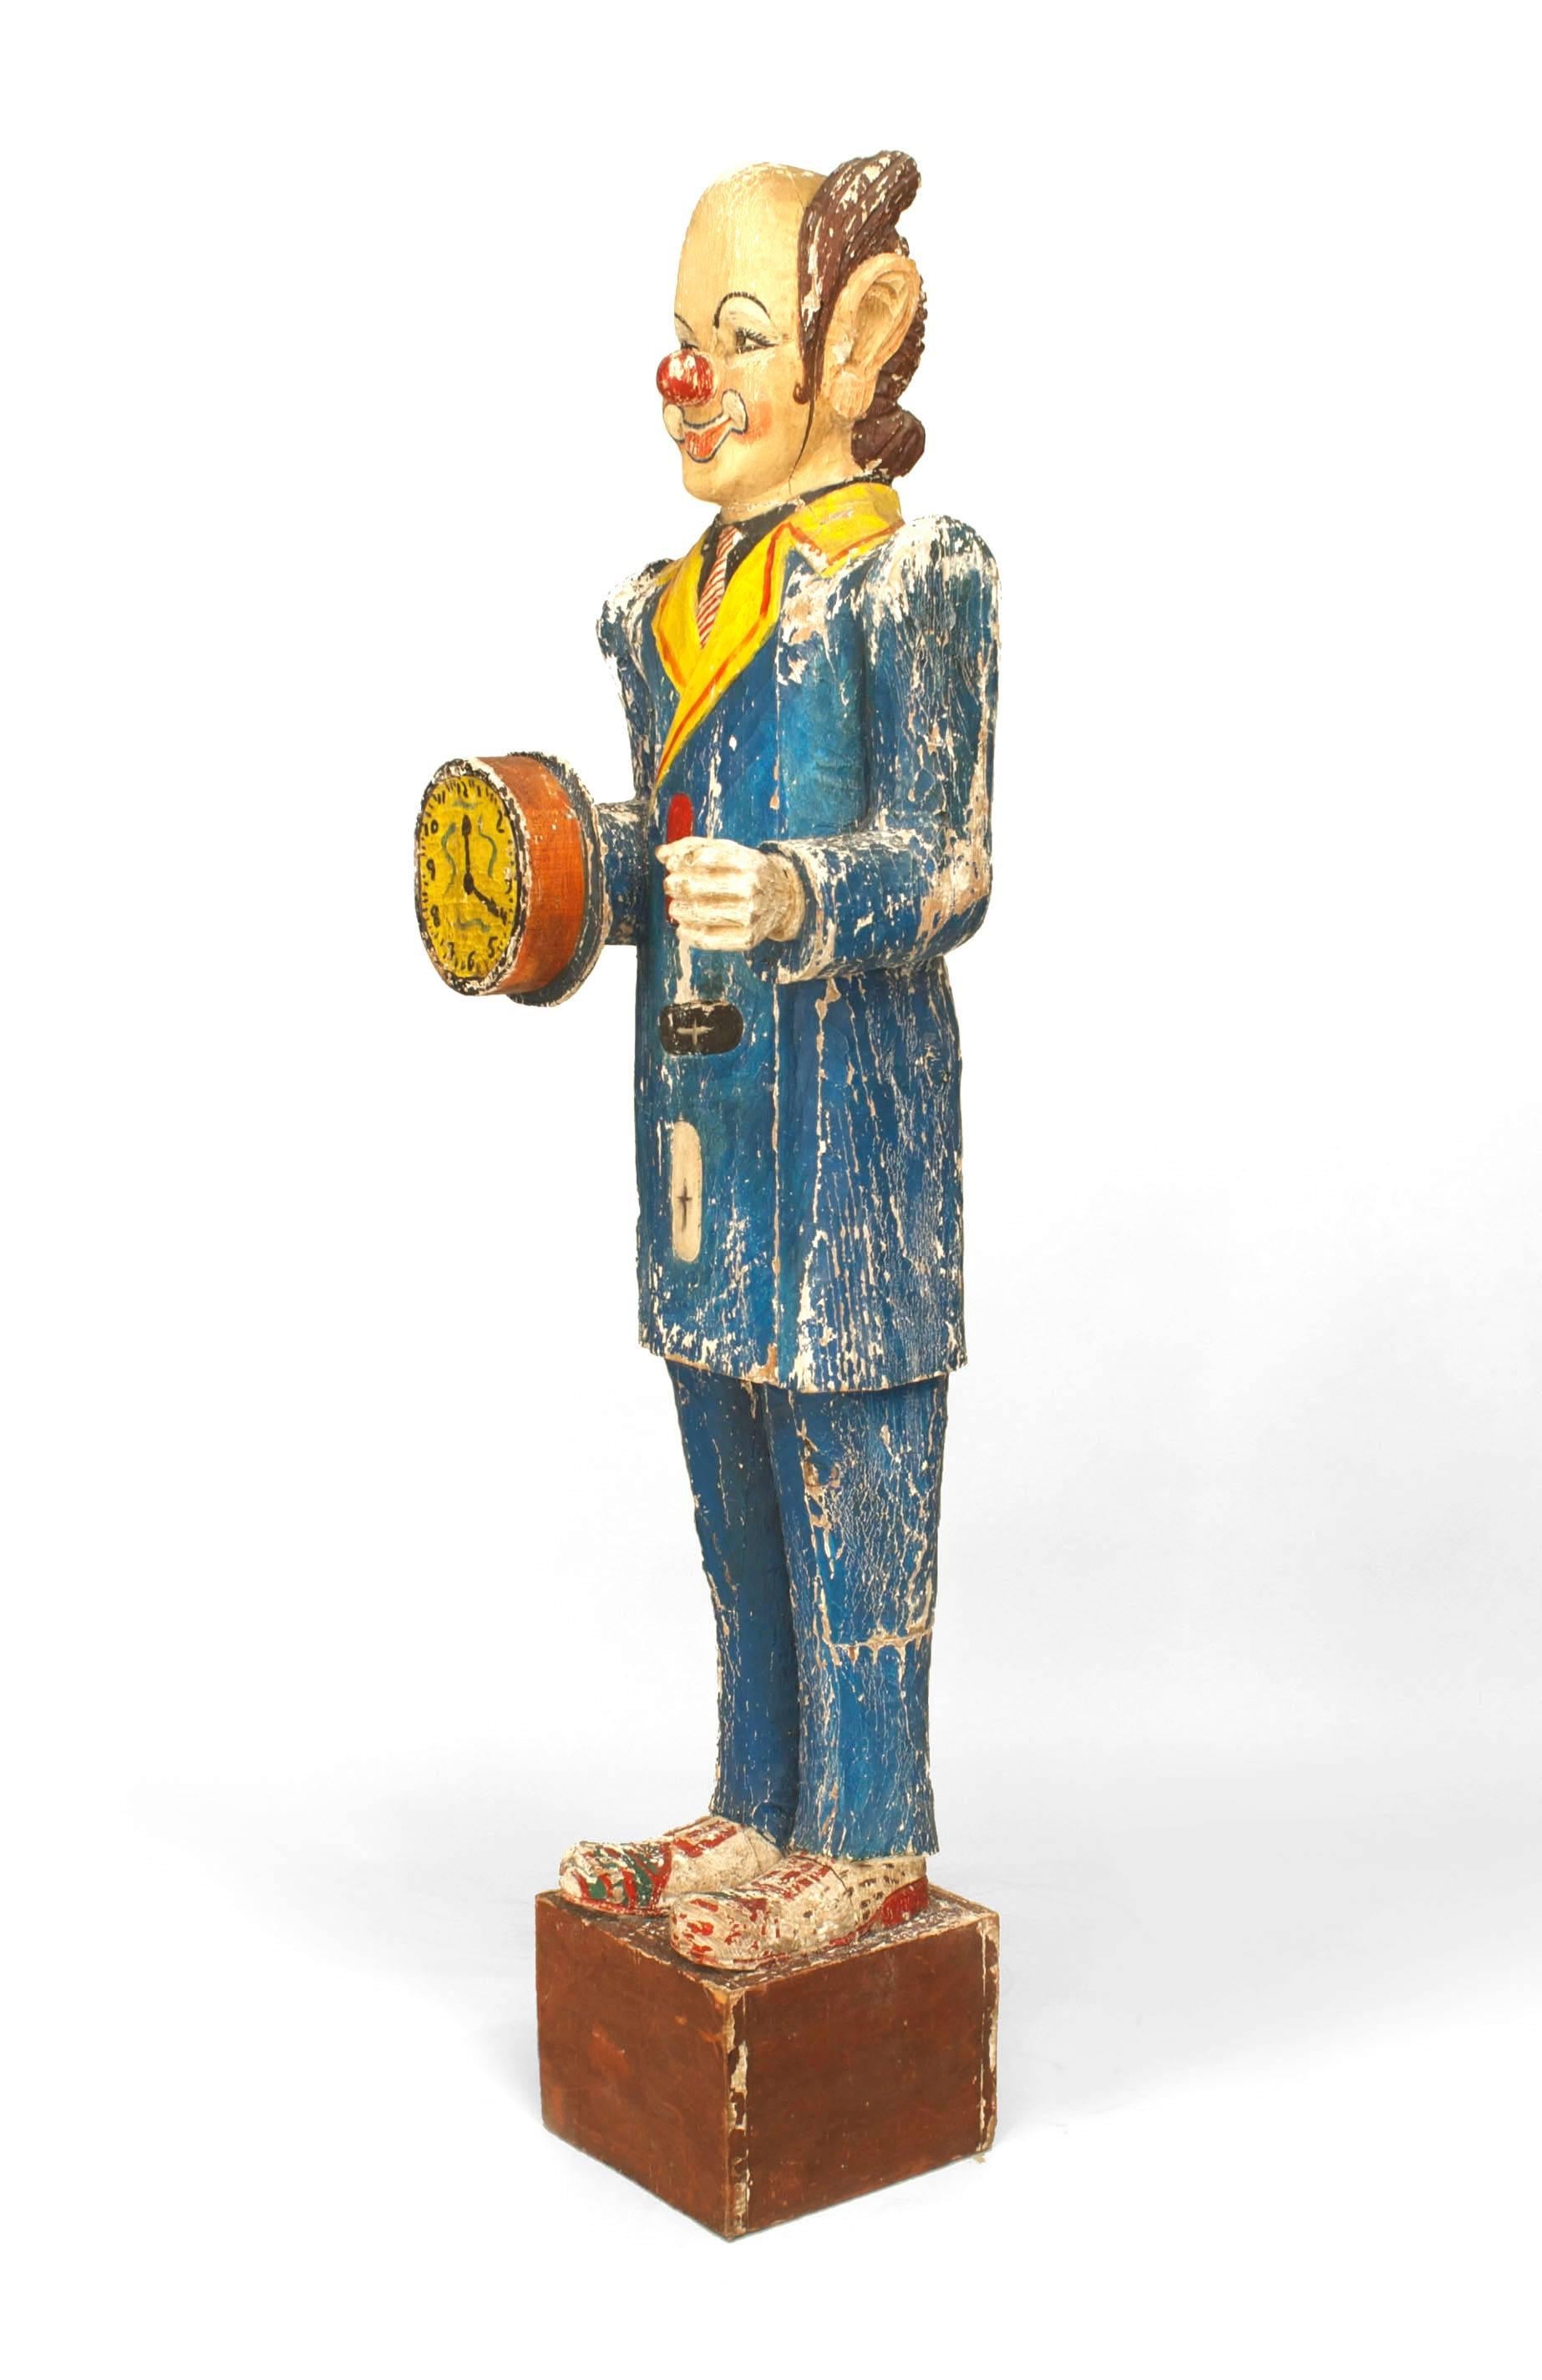 American Country style (mid 20th Cent) carved life-size wood figure of a circus side show clown holding a clock-face hat with a gesso and painted surface (possibly made by Boston Carving Co.)
